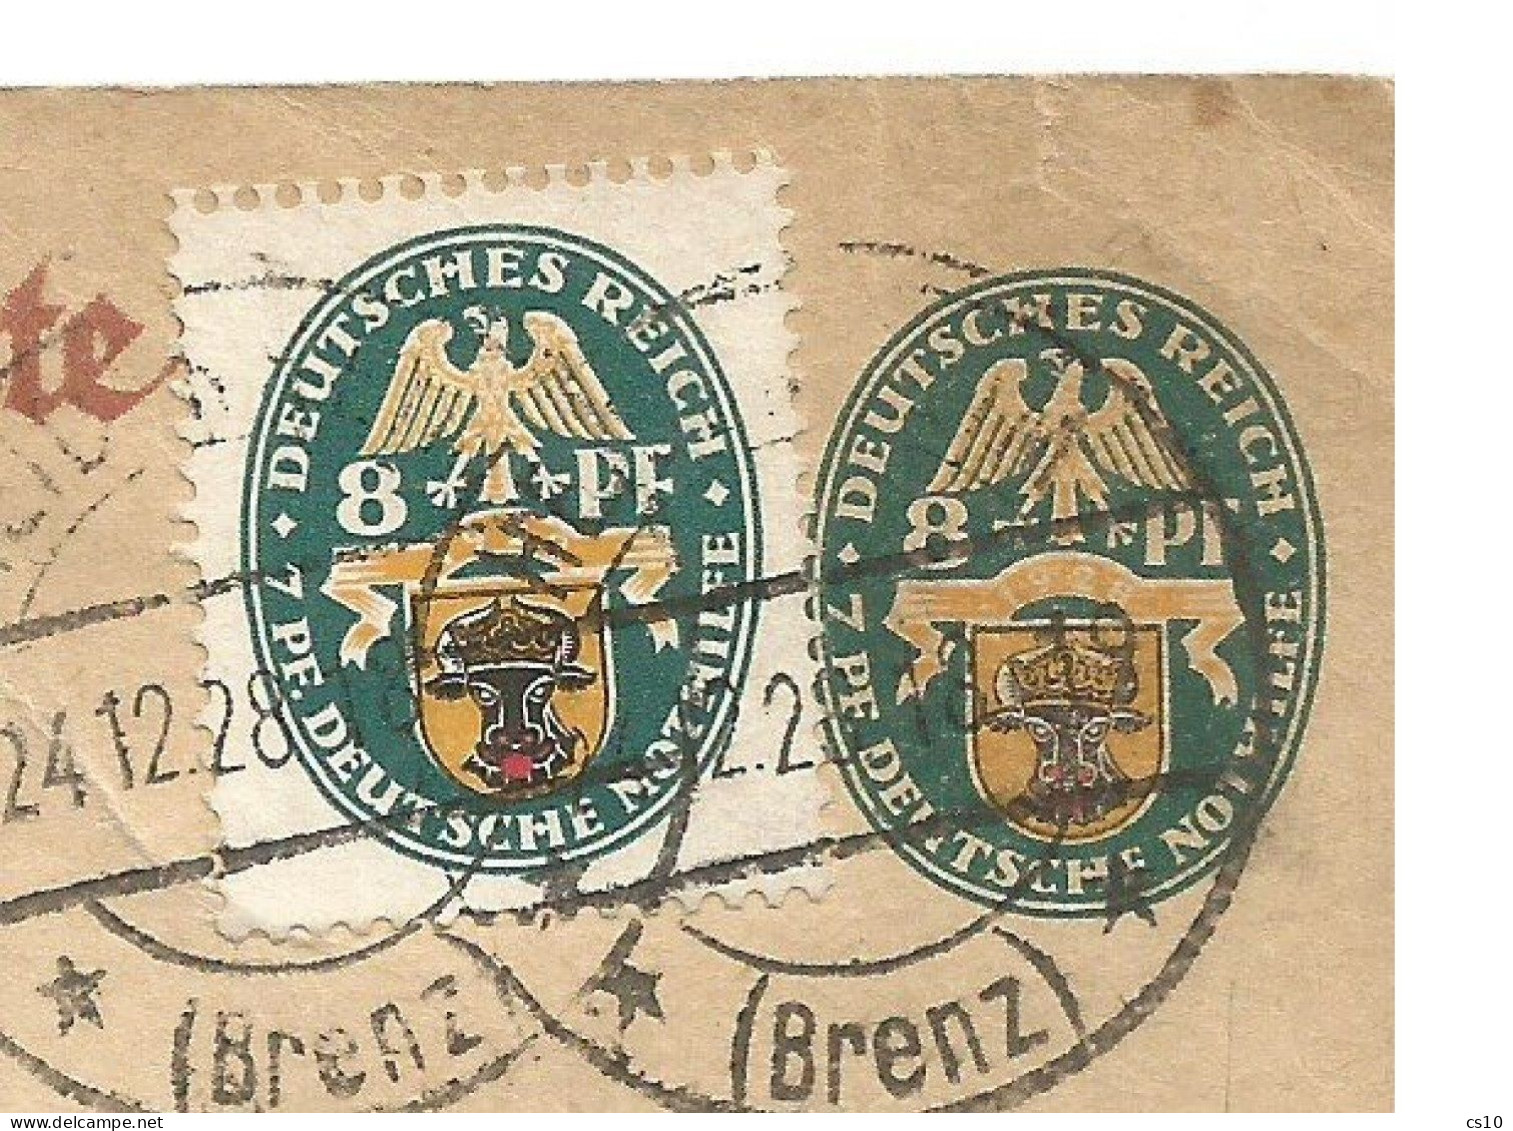 Germany INFLA Nothilfe 1928 Stationery Pf8 + The SCARCE Regular TWIN Pf8 RIGHT WMK See Scan Heidenheim 24dec1928 X USA - Covers & Documents